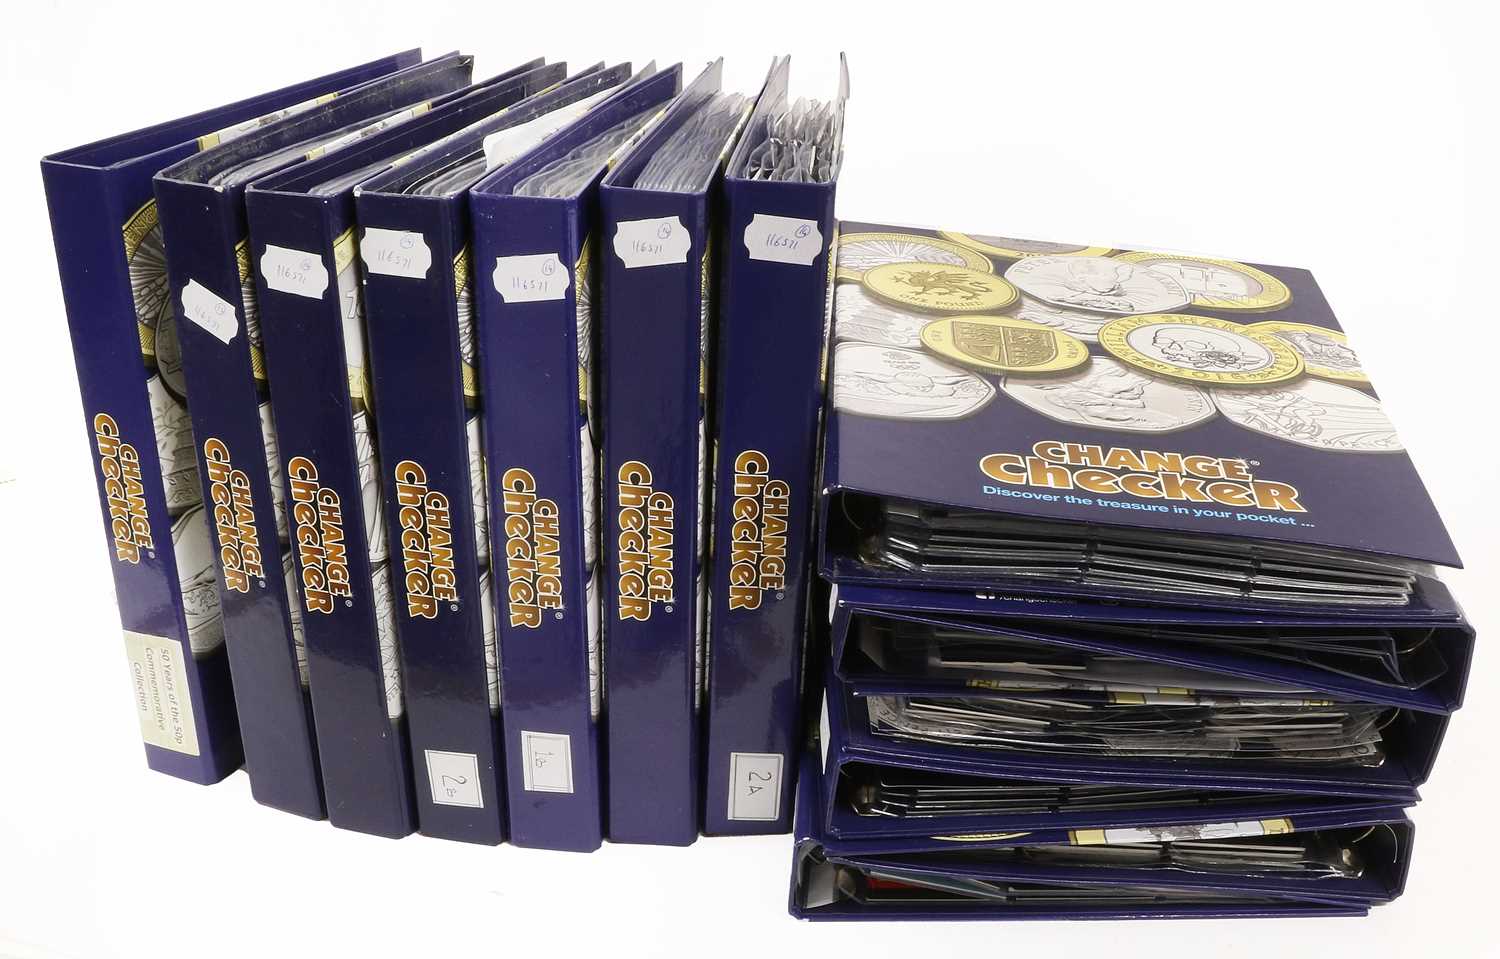 14 x Change Checker Folders, containing over 500 coins with a combined face value in excess of £900,